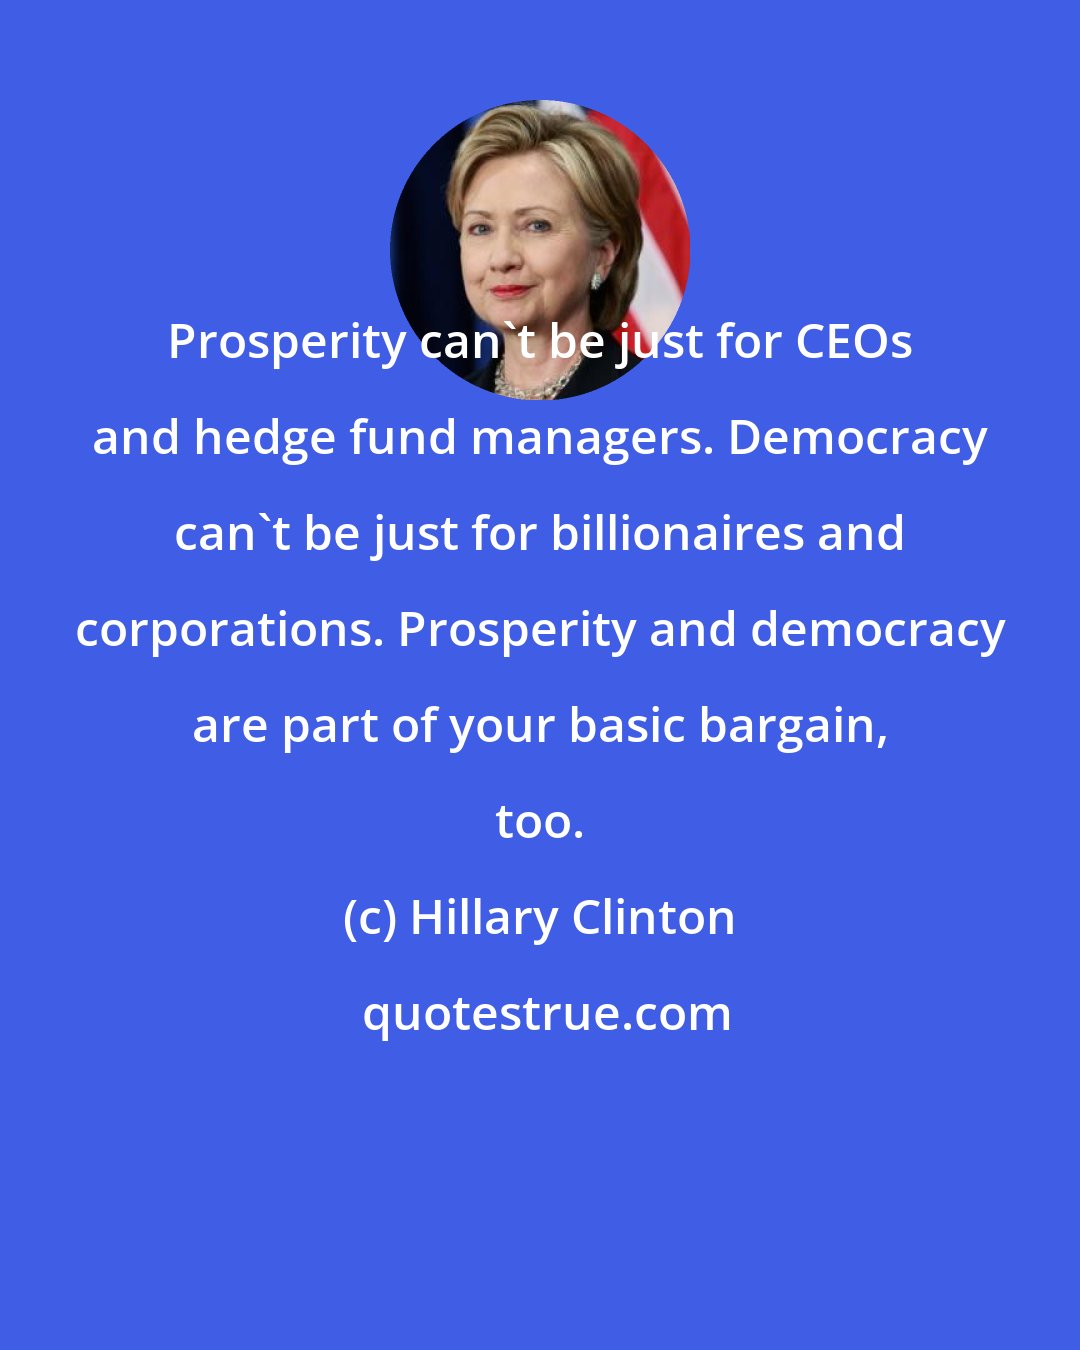 Hillary Clinton: Prosperity can't be just for CEOs and hedge fund managers. Democracy can't be just for billionaires and corporations. Prosperity and democracy are part of your basic bargain, too.